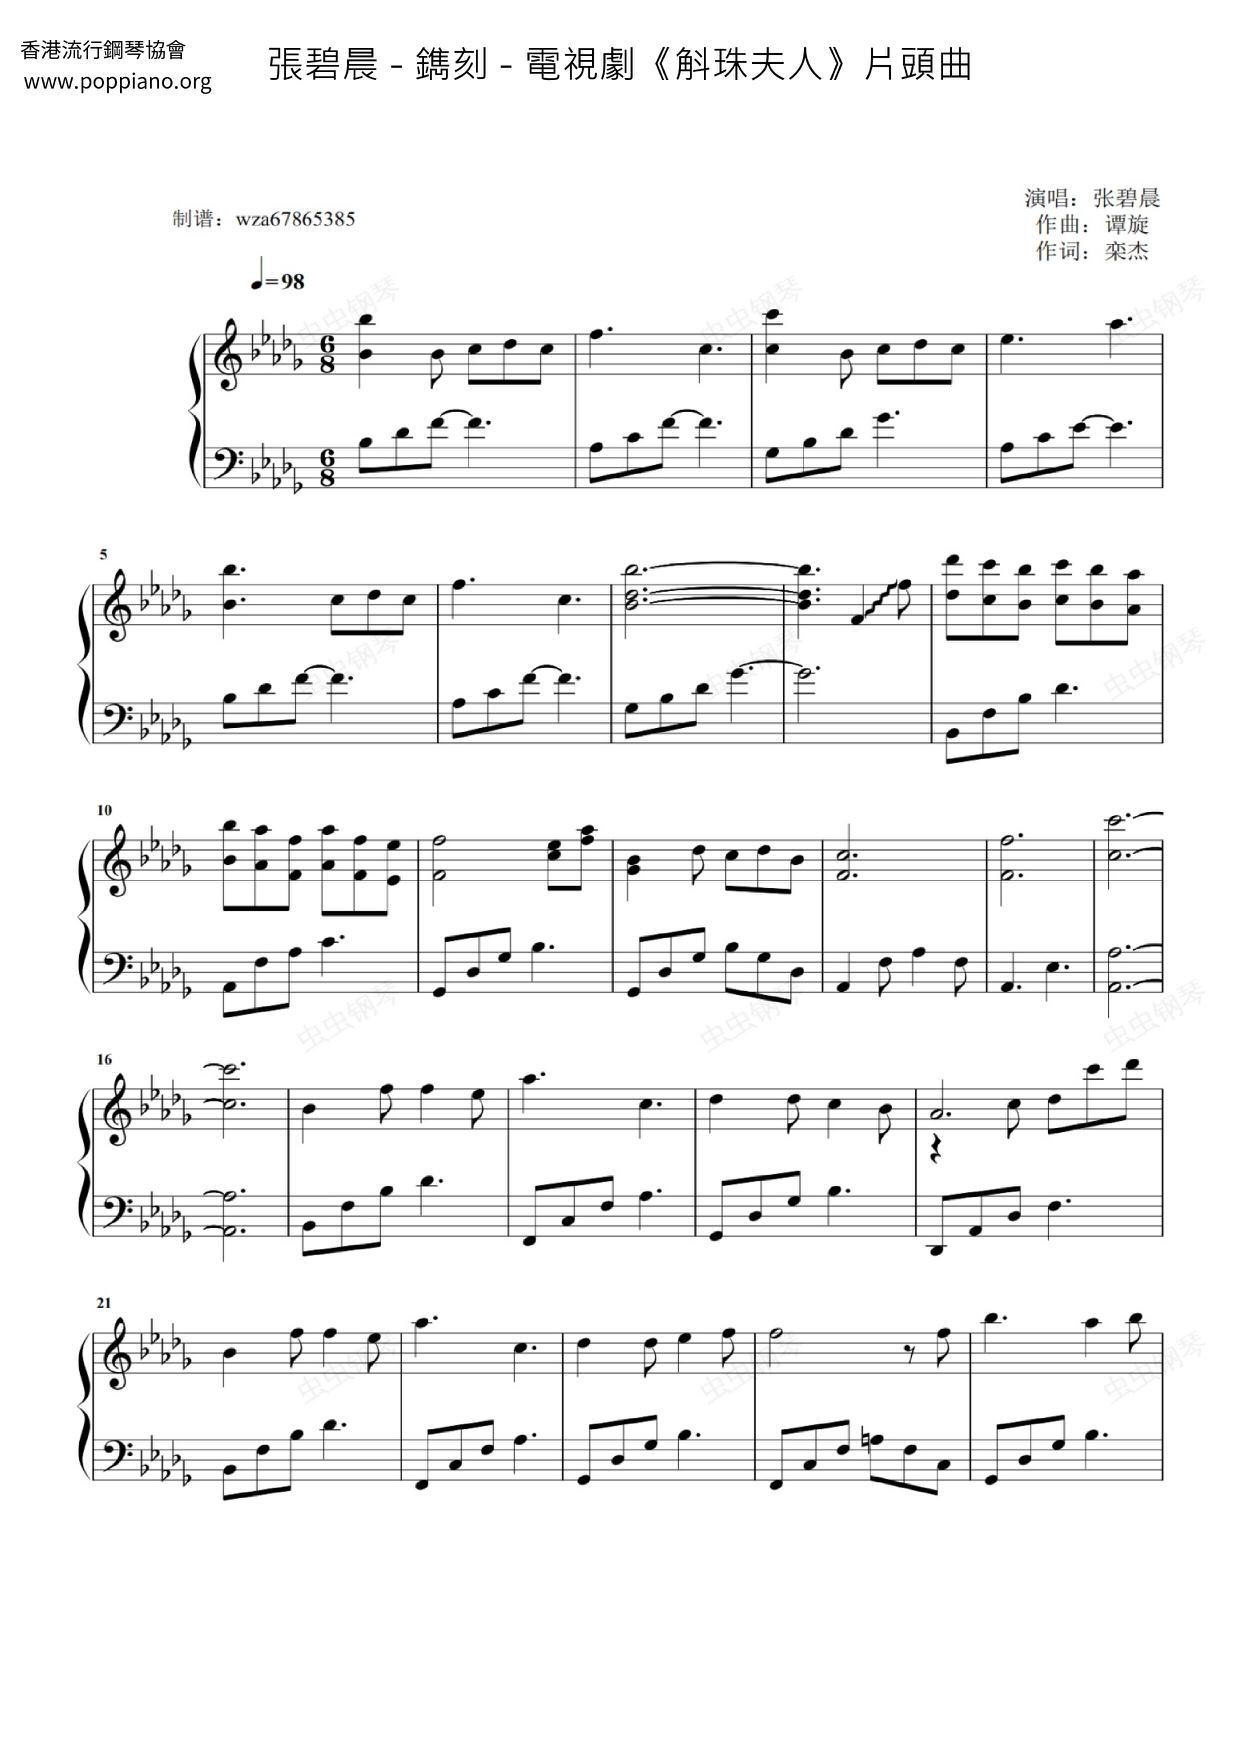 Dendrobium" Opening Song Score